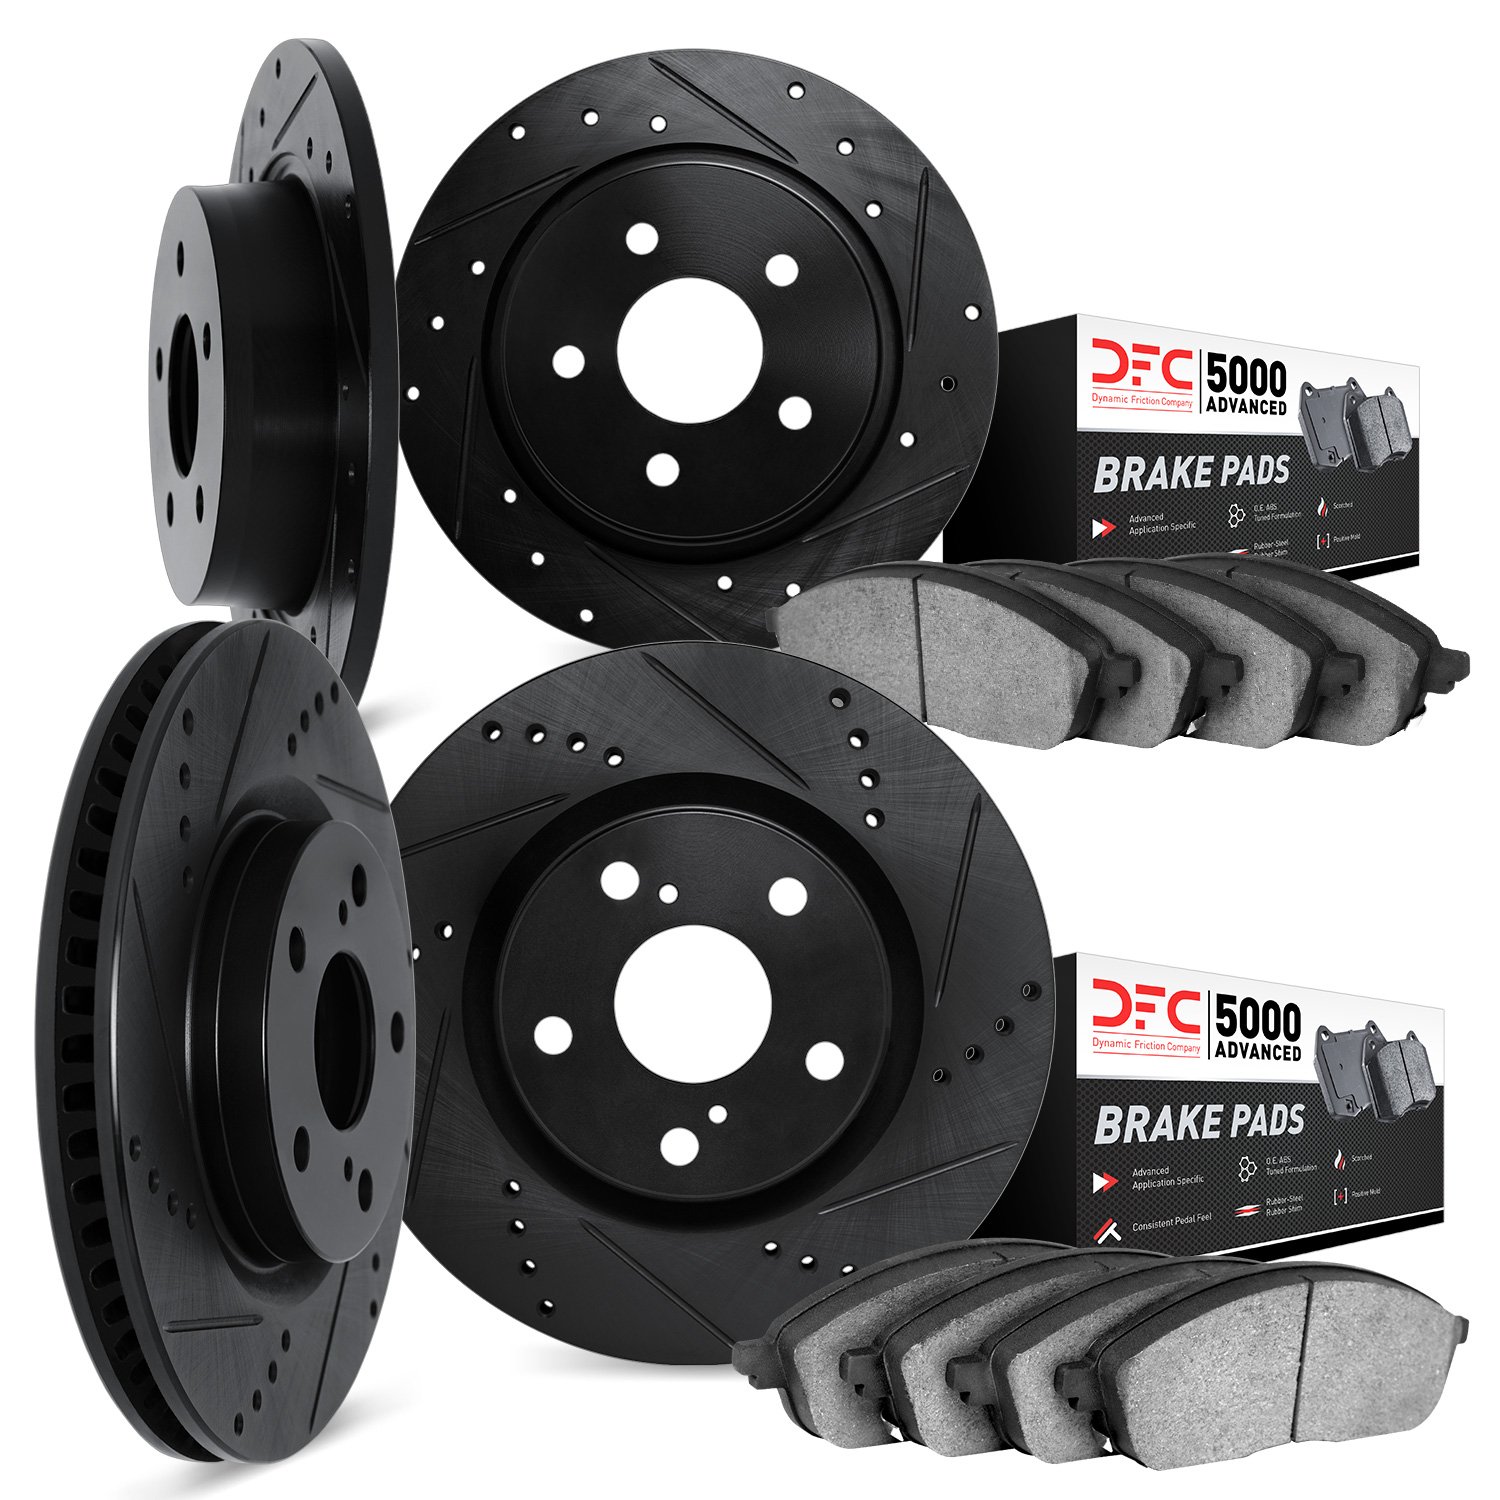 8504-58019 Drilled/Slotted Brake Rotors w/5000 Advanced Brake Pads Kit [Black], 2014-2016 Acura/Honda, Position: Front and Rear